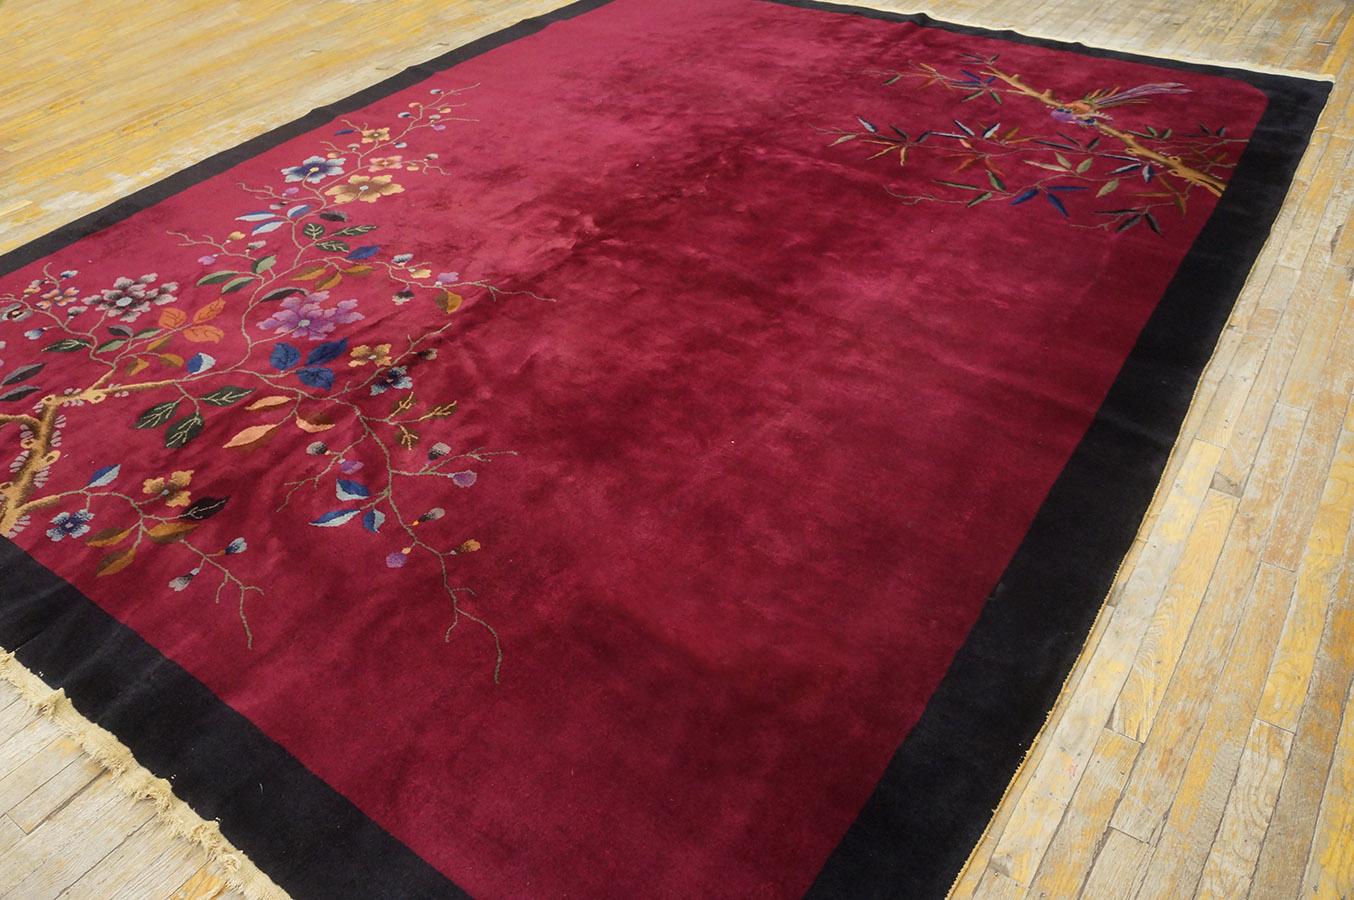 Hand-Knotted 1920s Chinese Art Deco Carpet ( 8' 10'' x 11' 6'' - 270 x 350 cm ) For Sale